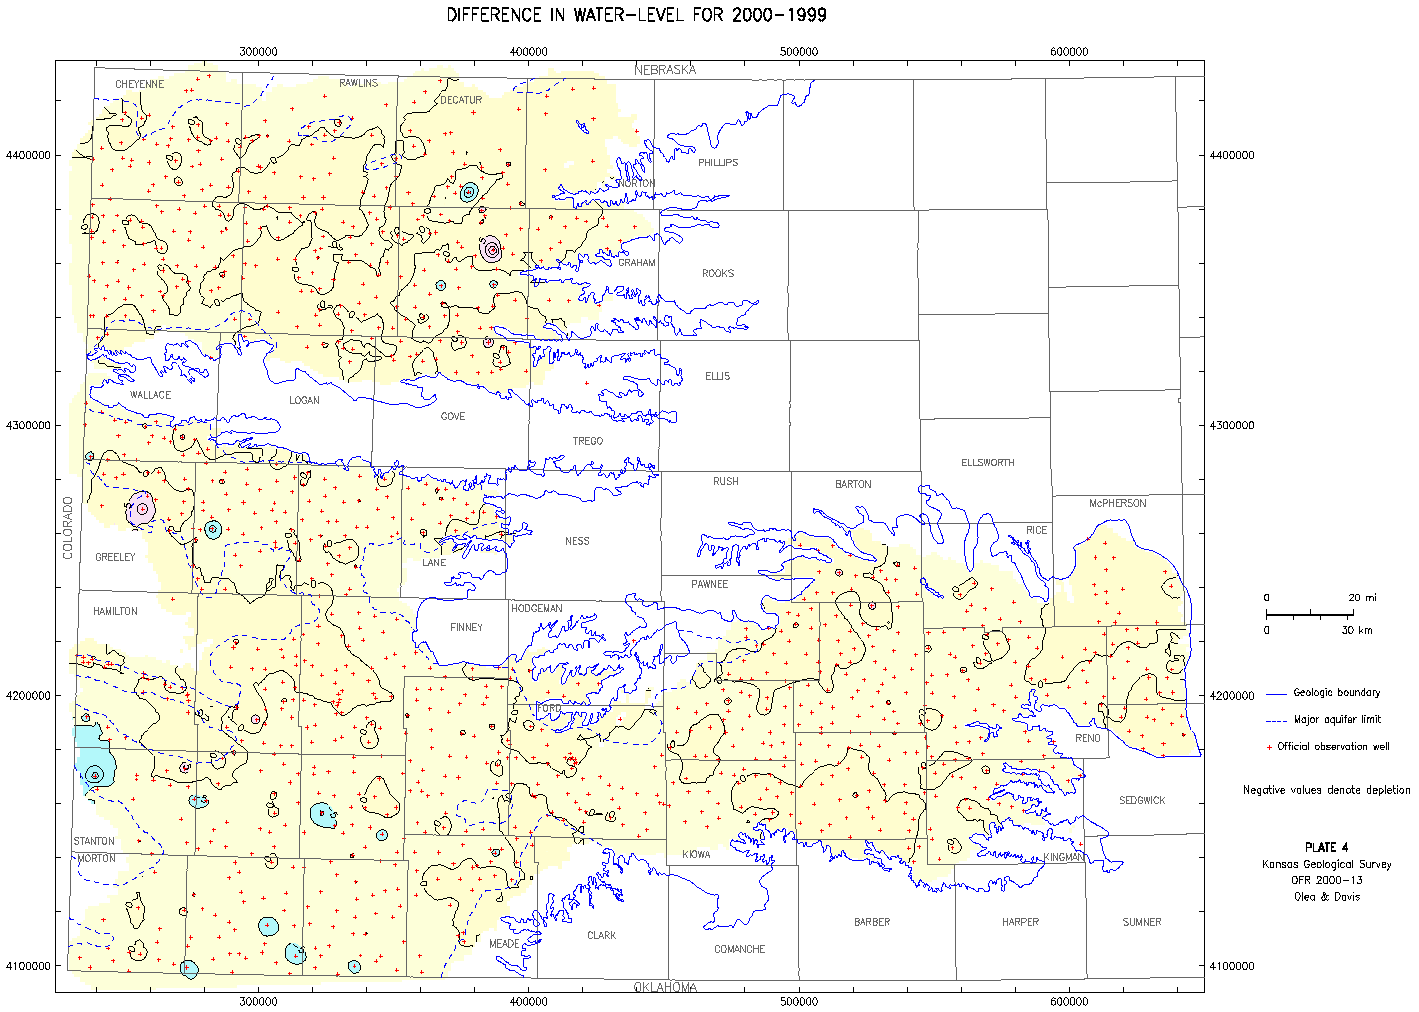 Difference in Water Level, 2000-1999